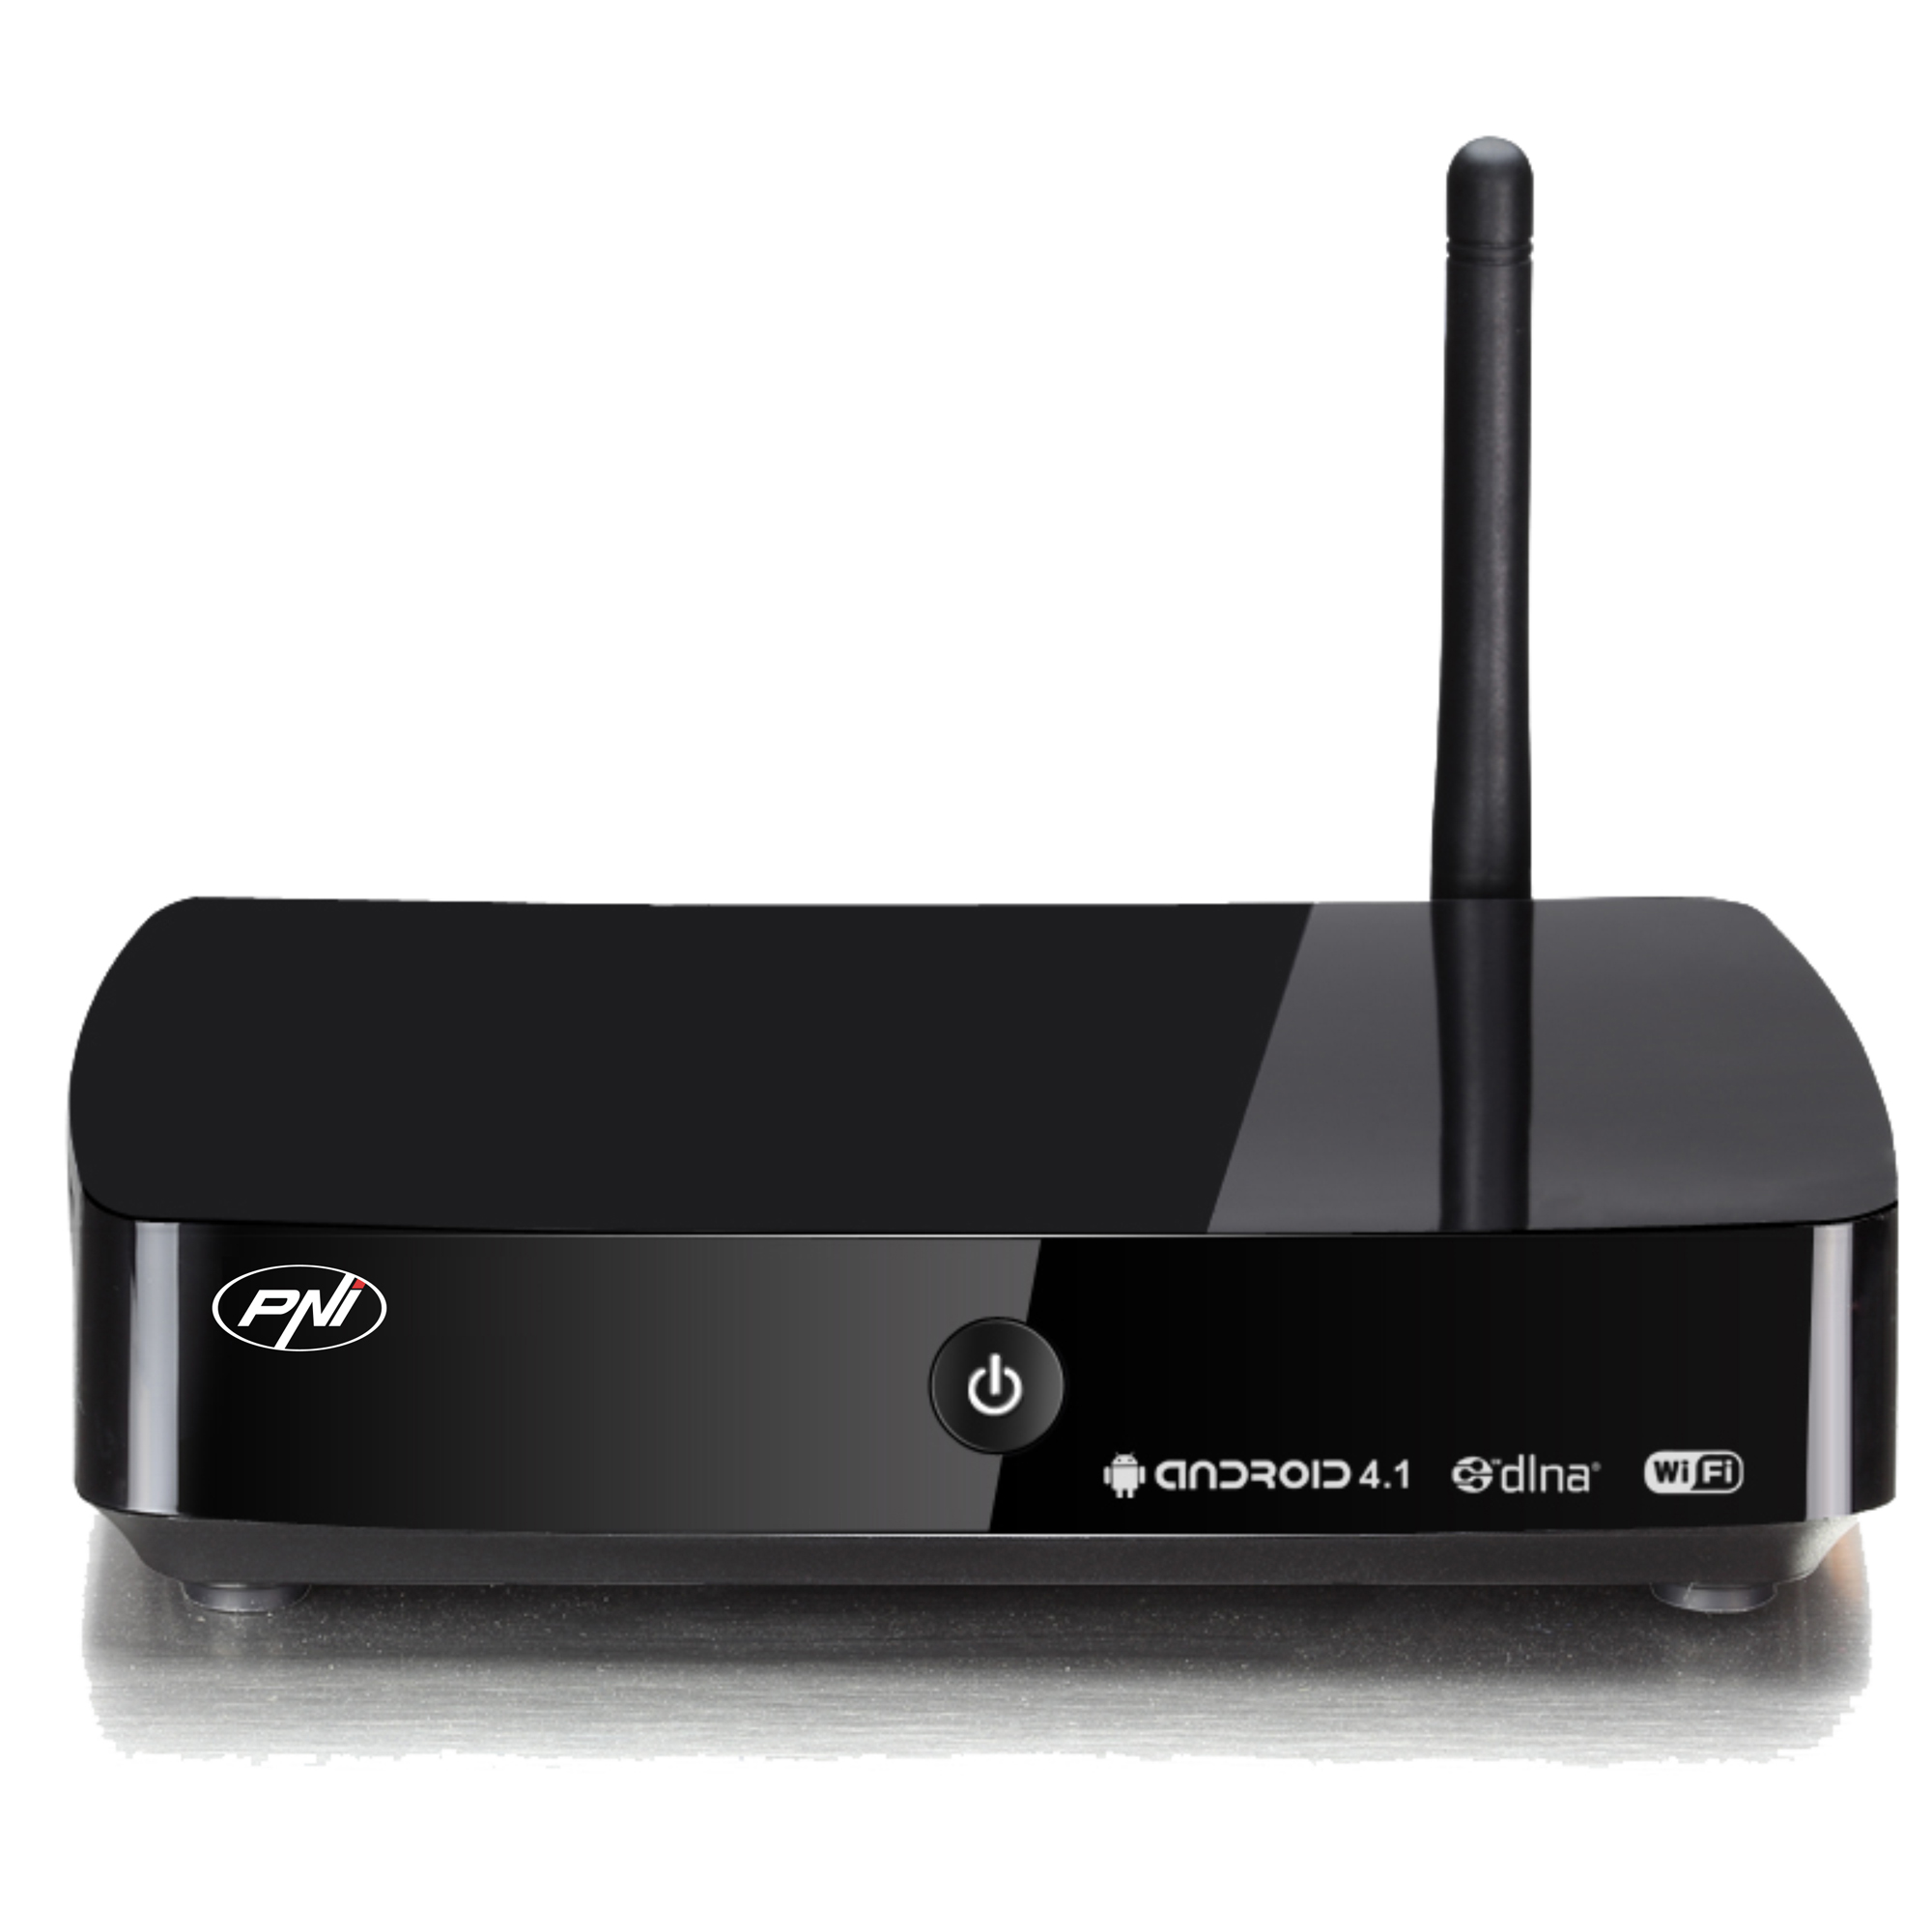  Media player PNI Mini PC Notebook P5, Full HD, Android 4.1 